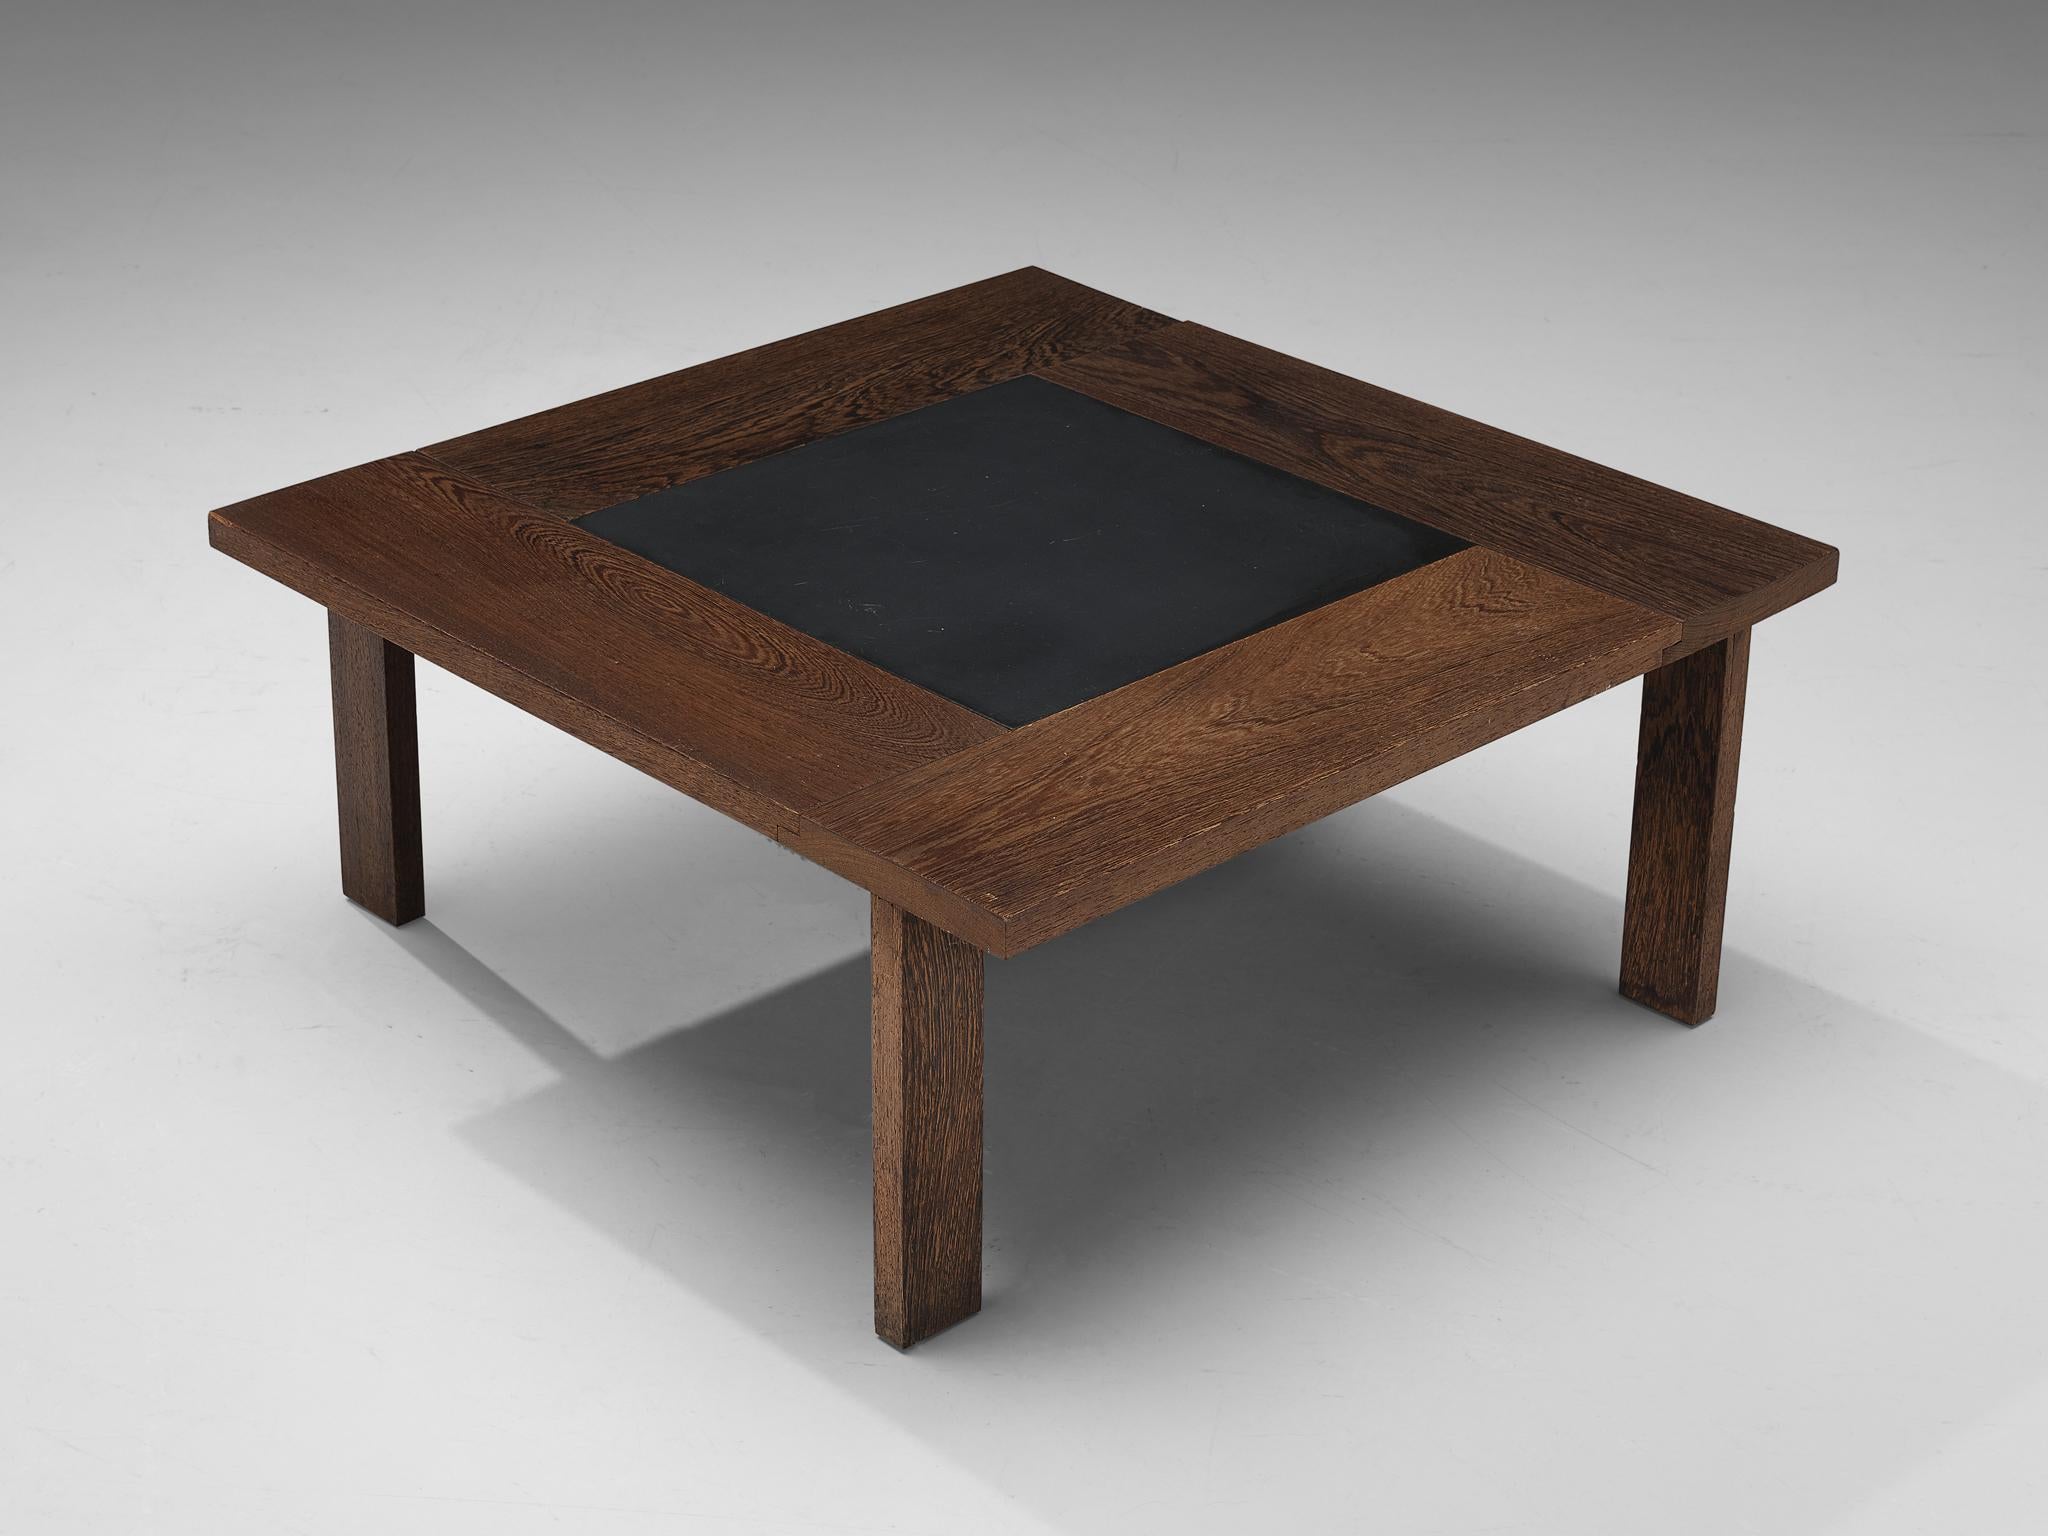 Coffee table, wengé, slate, Denmark, 1960s.

This modest, simplistic coffee table is very convincing to the eye by means of the implementation of natural materials. The wengé showcases an intricate warm deep wooden grain that gracefully surrounds